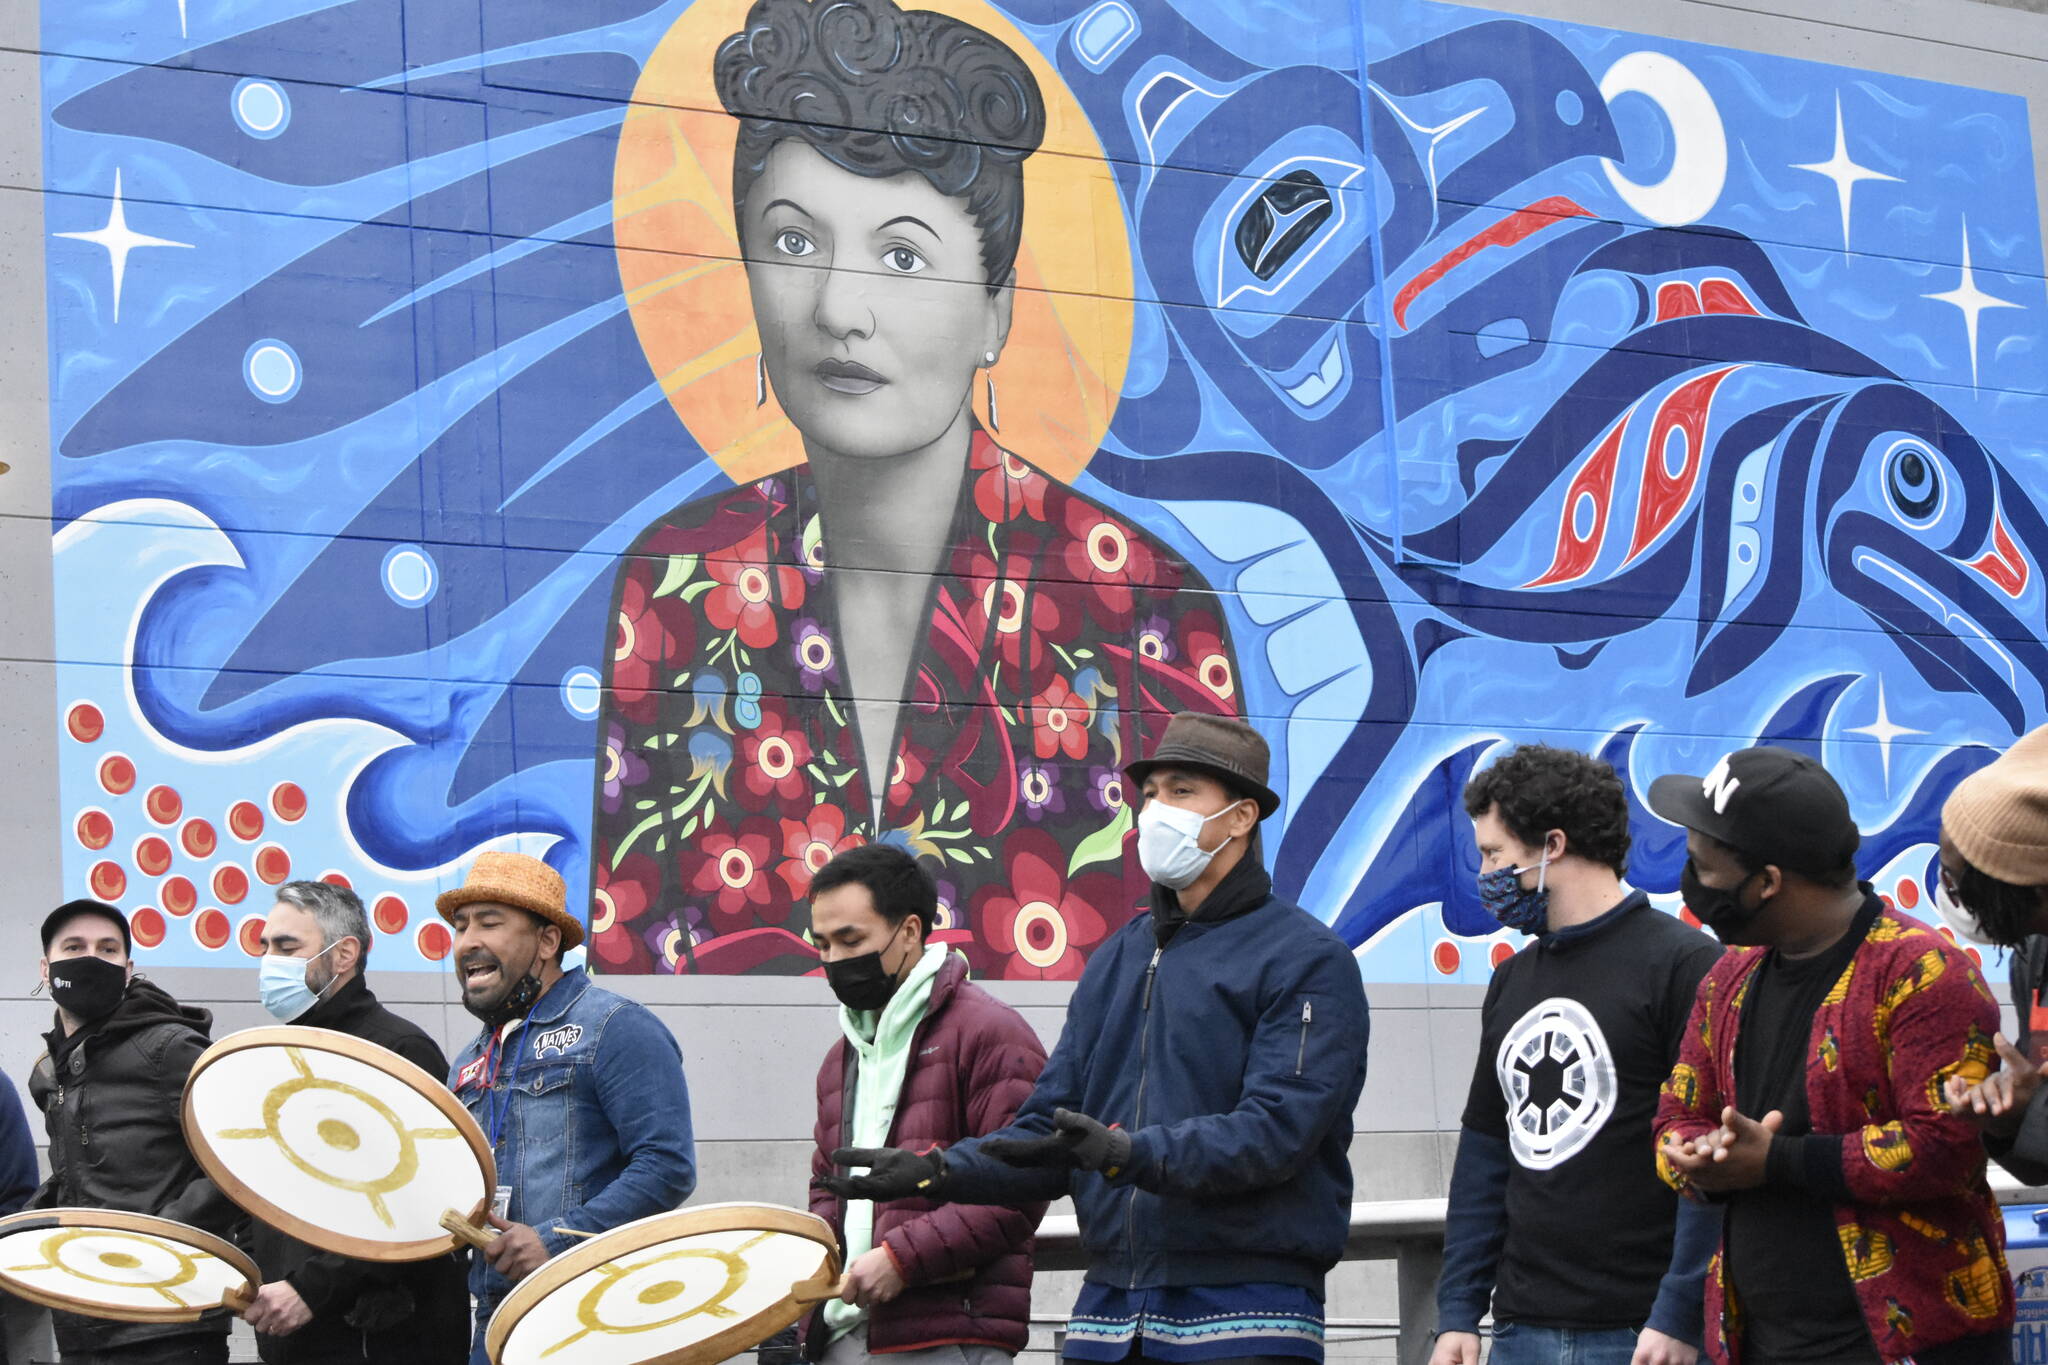 Artists of the inaugural Rock Aak’w Indigenous Music Festival gather beneath the mural of Elizabeth Peratrovich on the Juneau waterfront on Friday, Nov. 5, 2021. This year the ceremony was all virtual, but organizers wanted to open the festival in person. (Peter Segall / Juneau Empire)